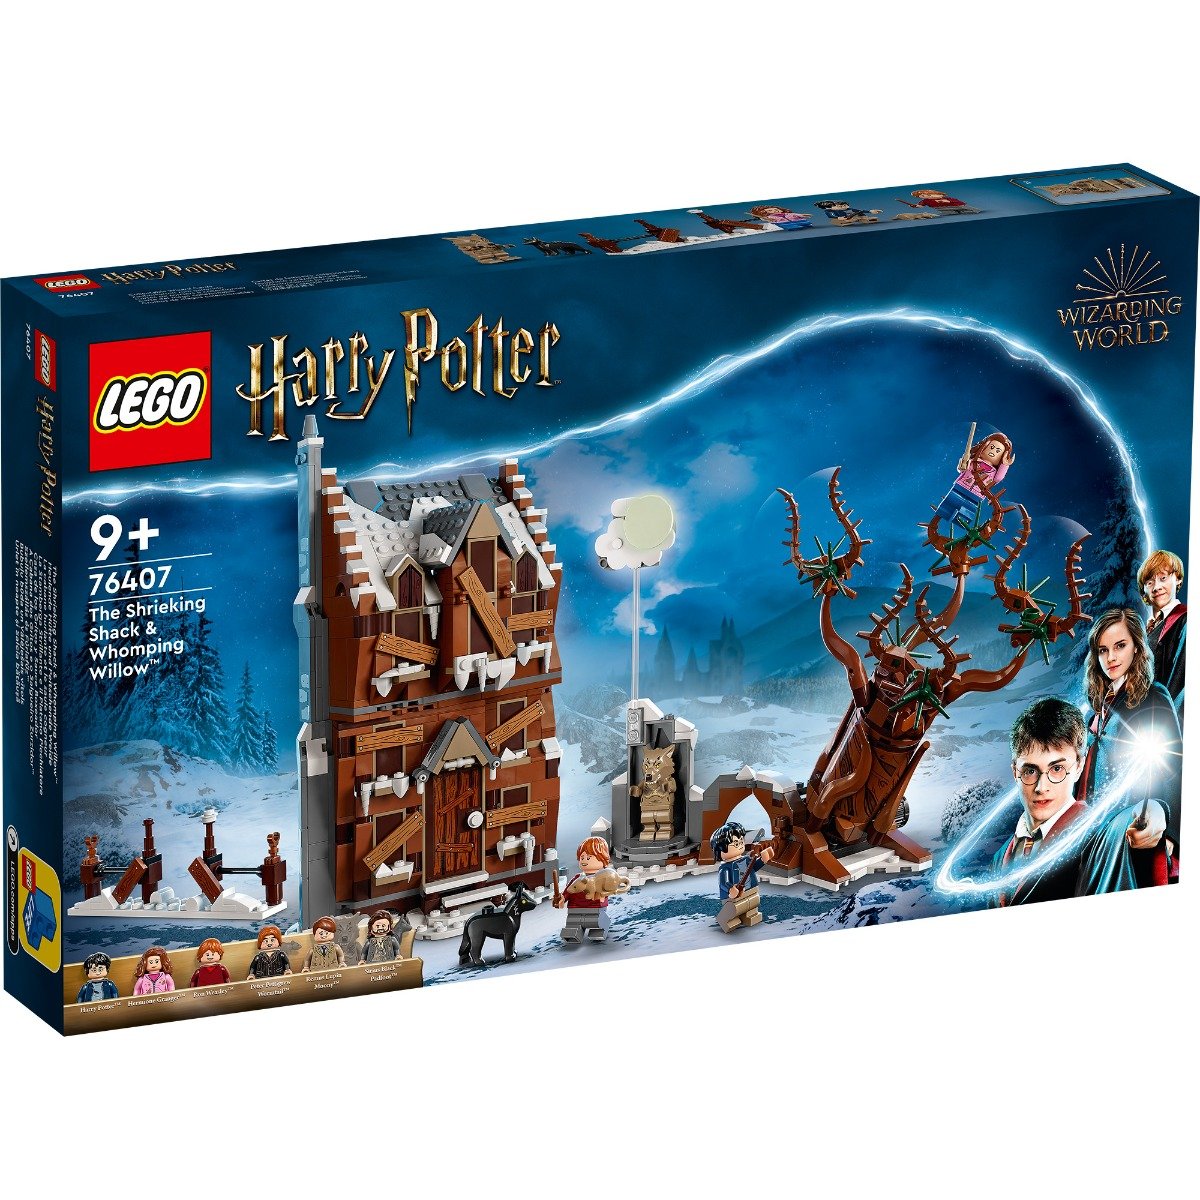 LEGO® Harry Potter – Urlet in noapte si Whomping Willow™ (76407) (76407) imagine 2022 protejamcopilaria.ro